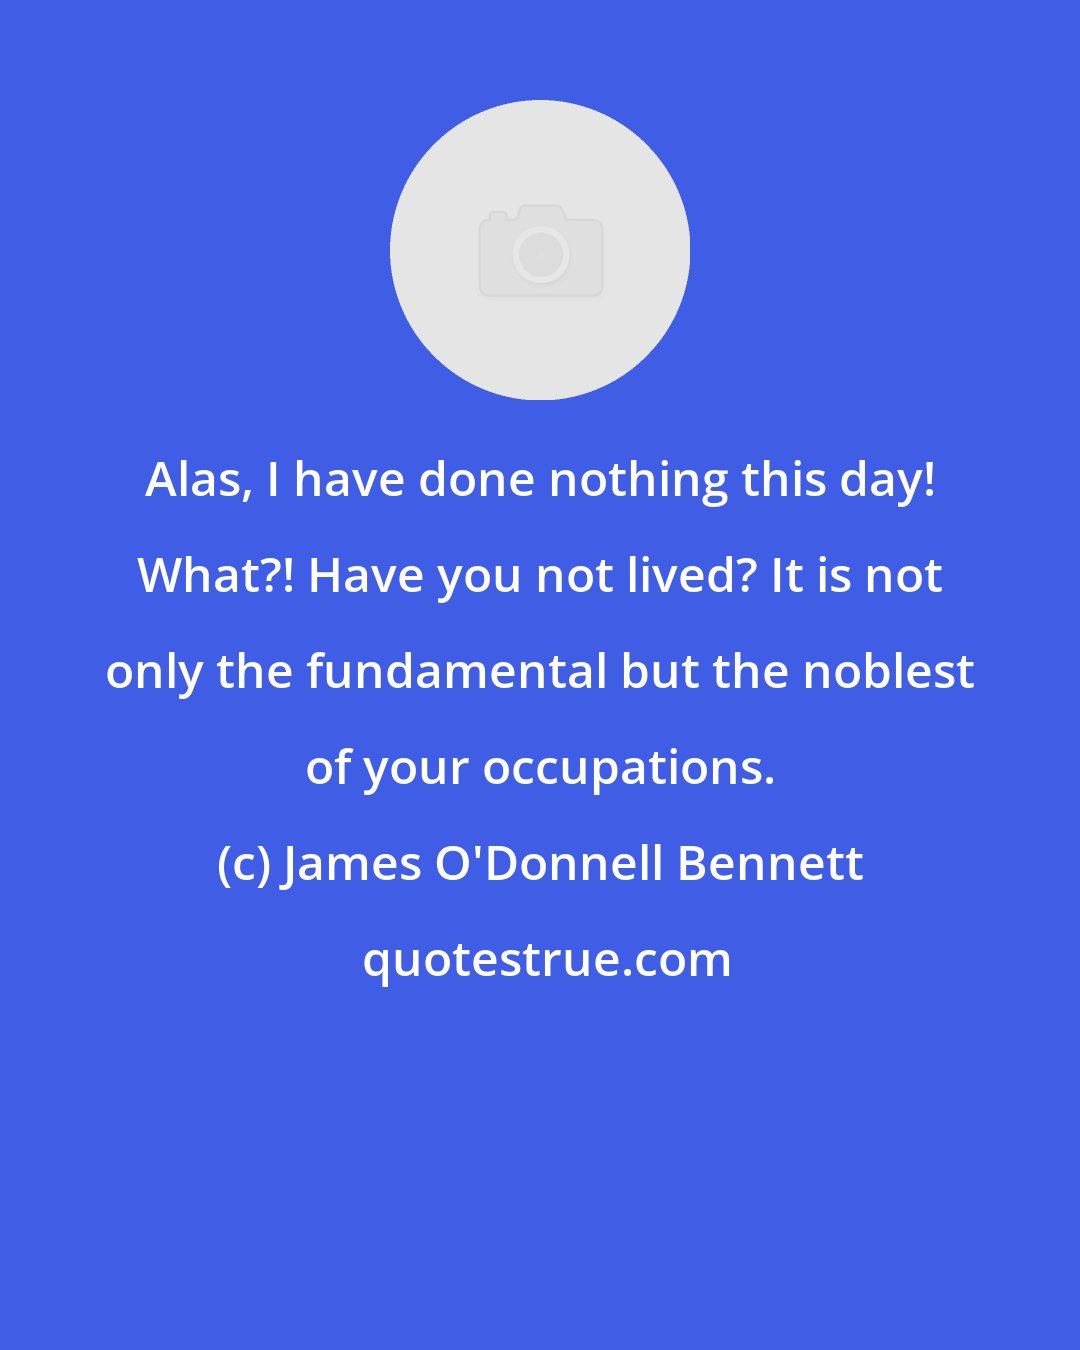 James O'Donnell Bennett: Alas, I have done nothing this day! What?! Have you not lived? It is not only the fundamental but the noblest of your occupations.